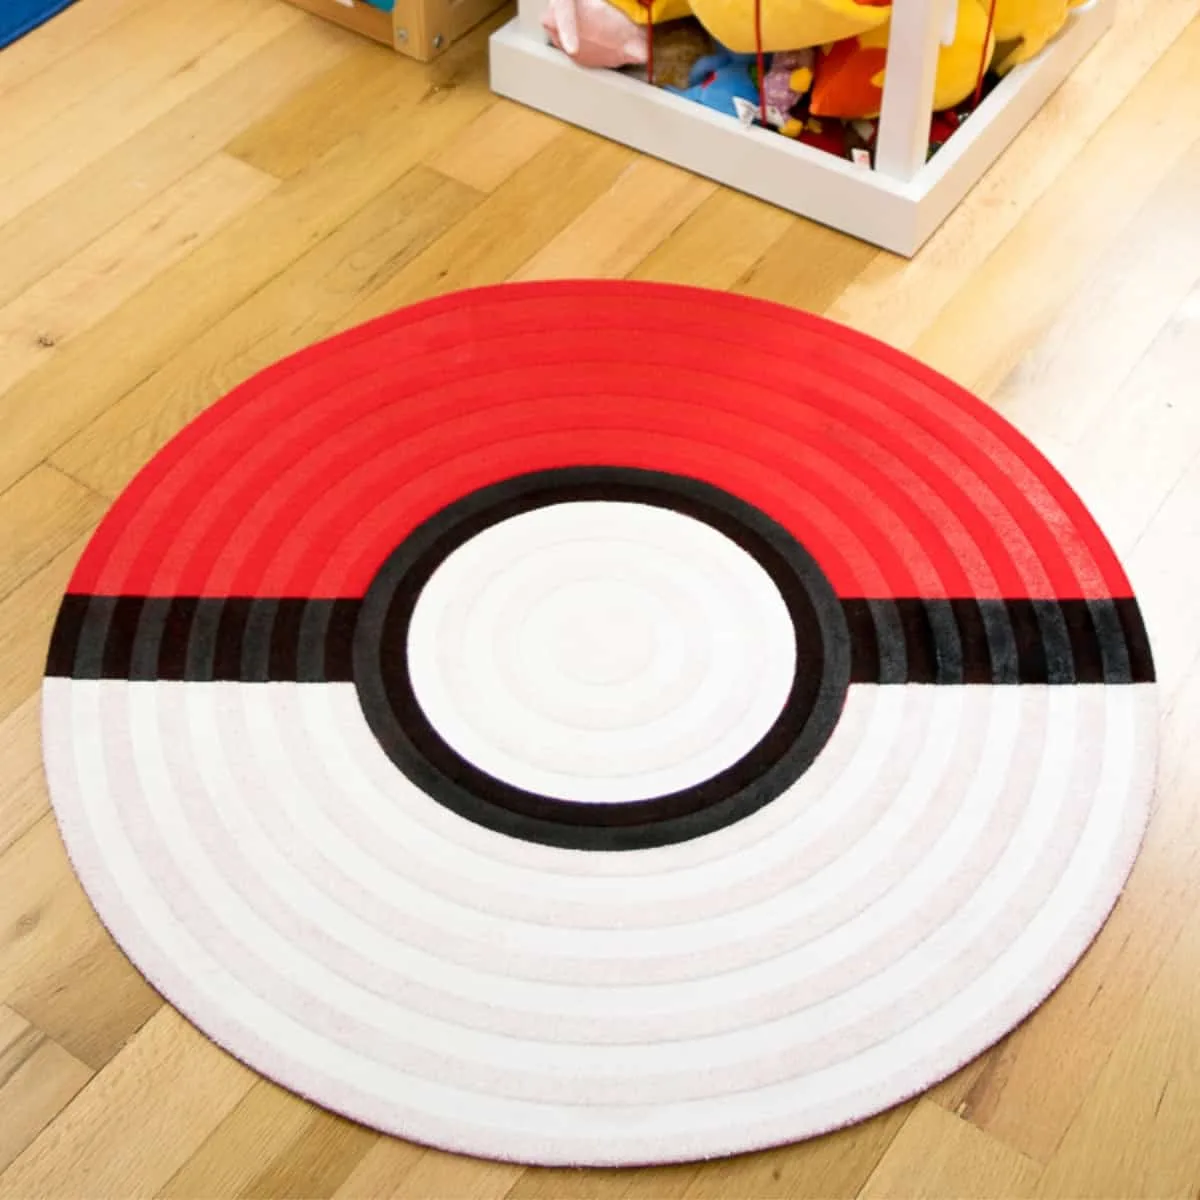 round area rug painted to look like a poke ball